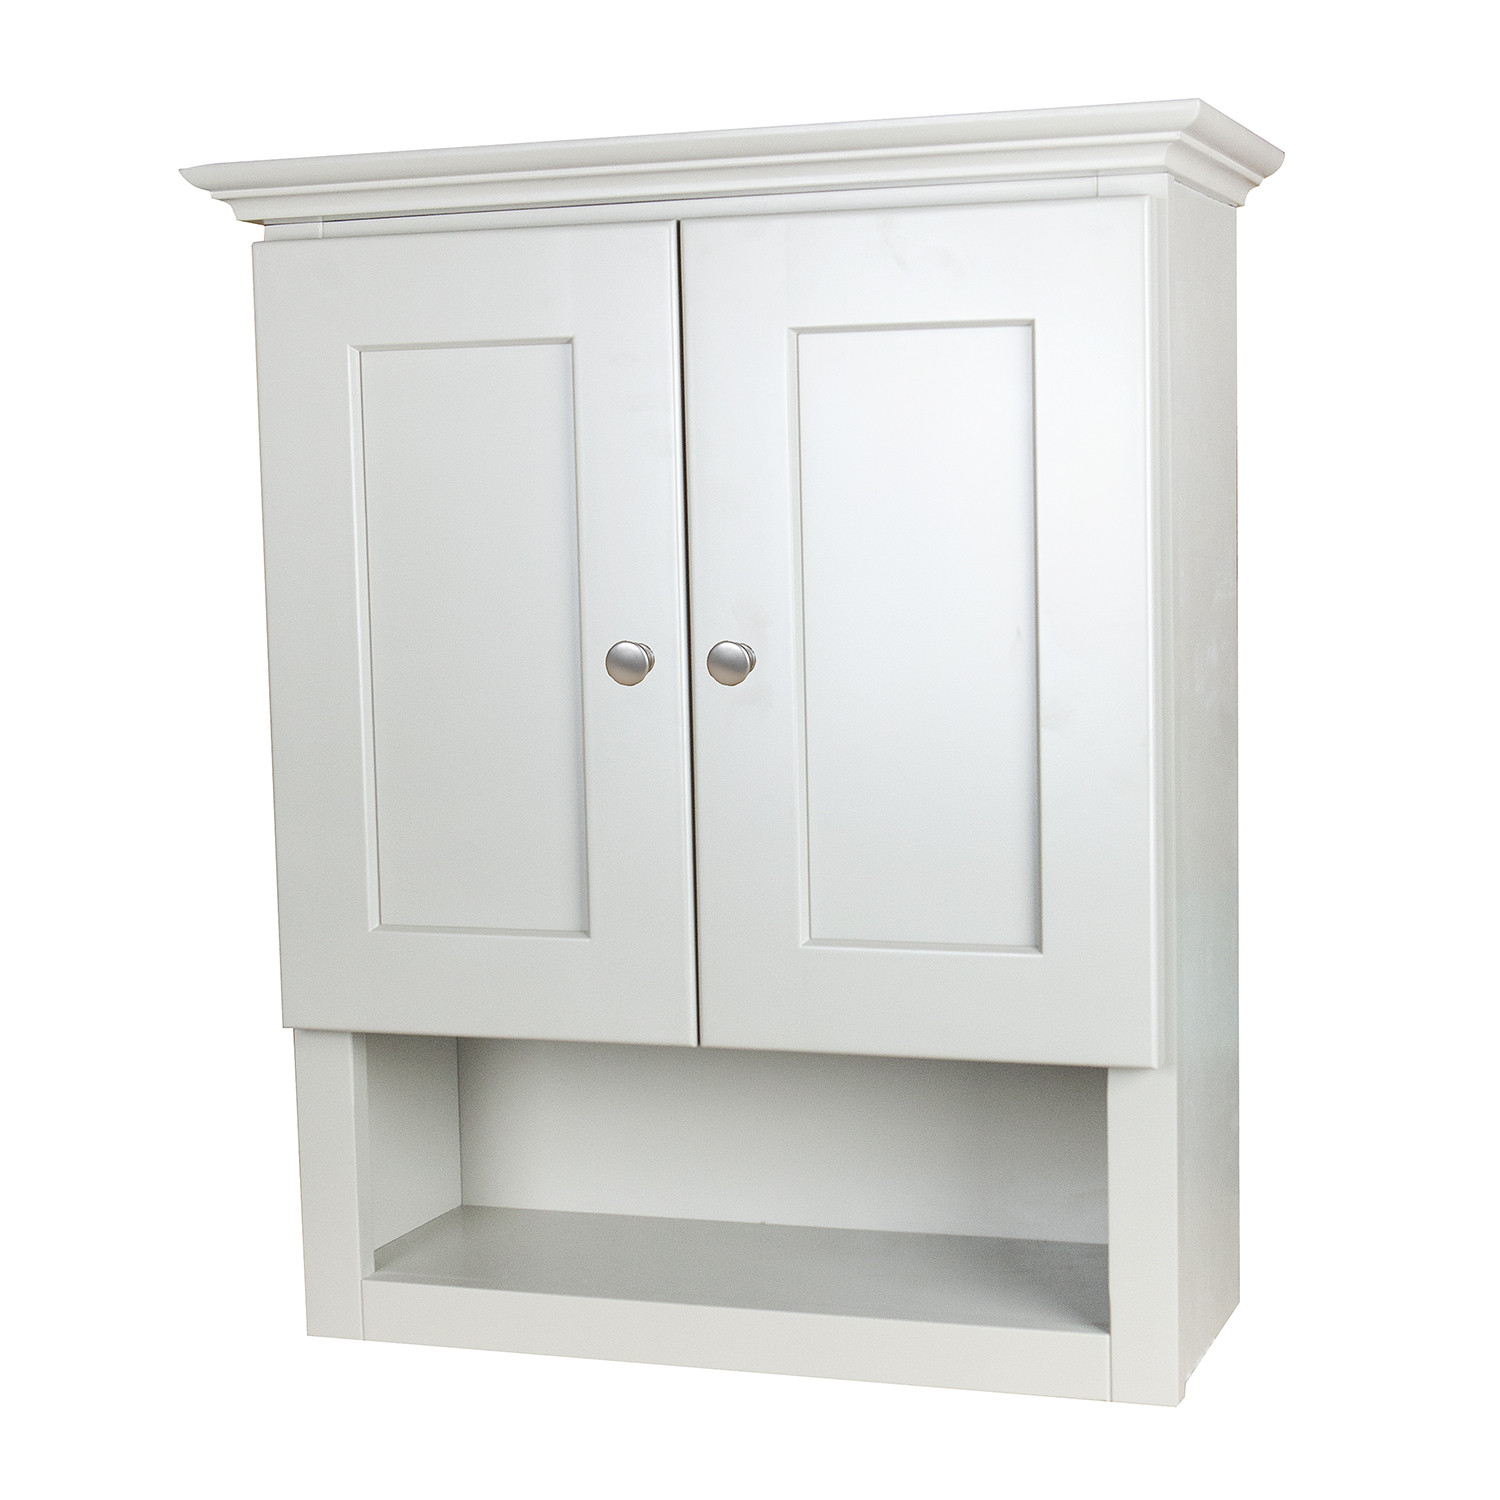 Wall Bathroom Cabinet
 White Shaker Bathroom Wall Cabinet with 2 shelves